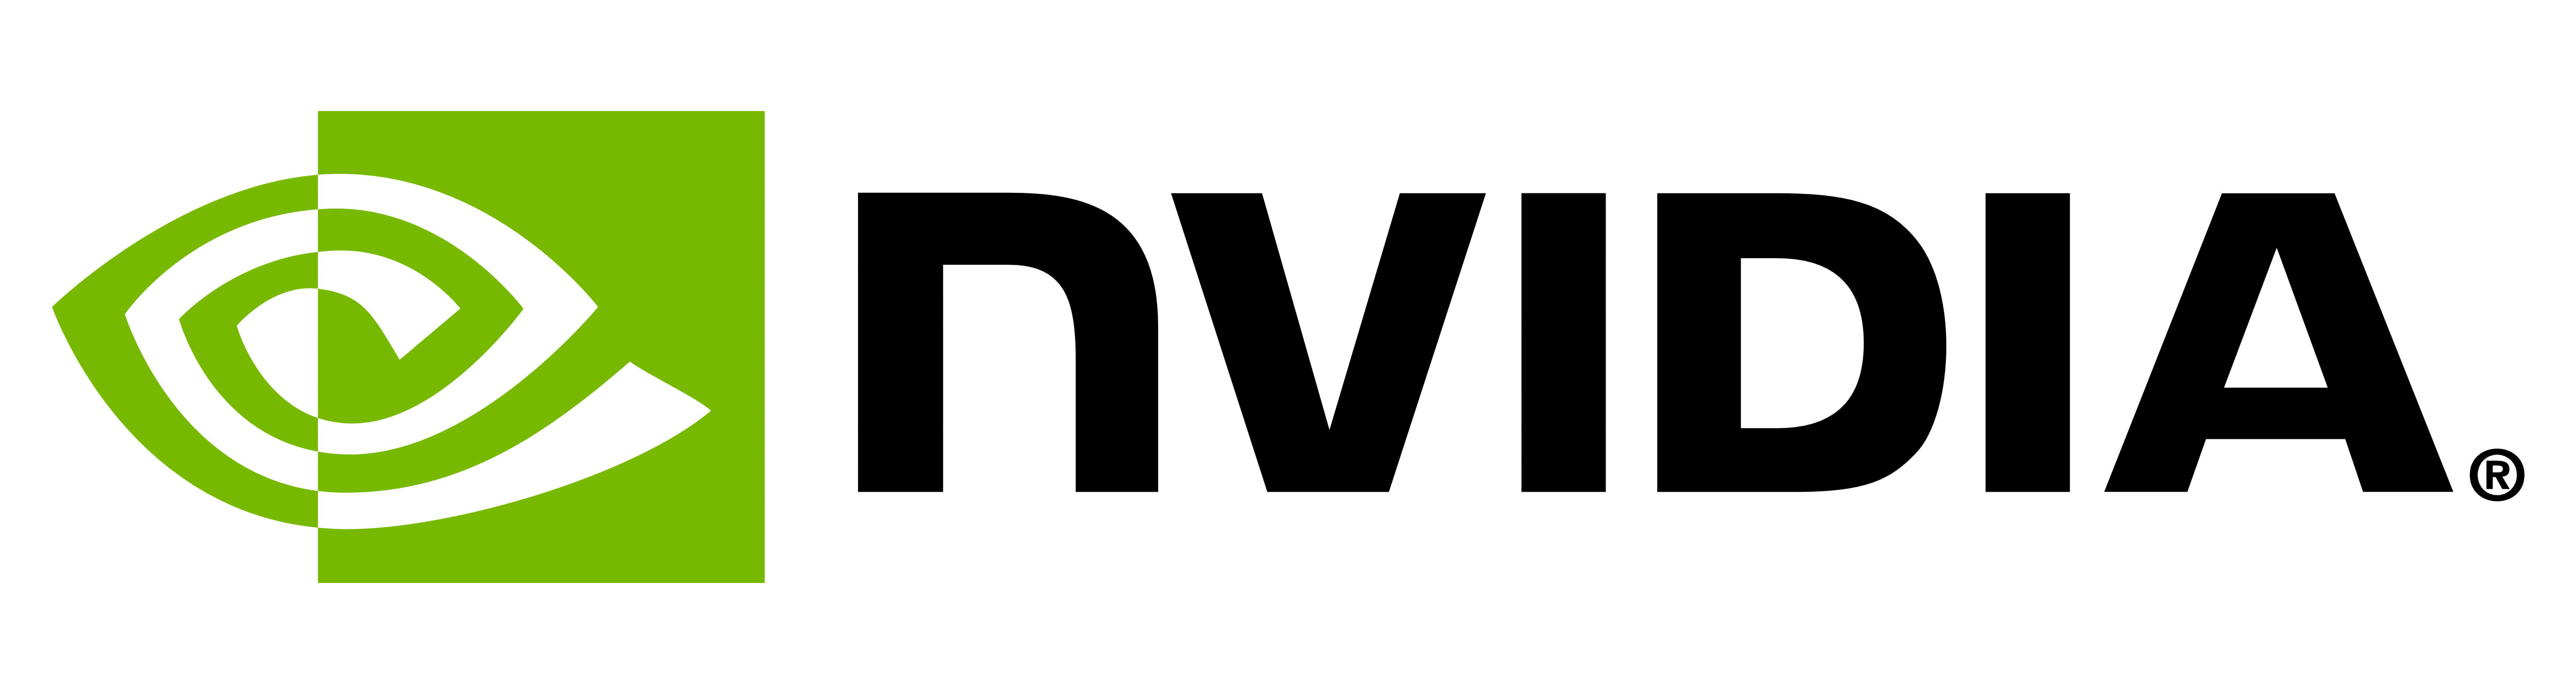 Meaning NVIDIA logo and symbol | history and evolution